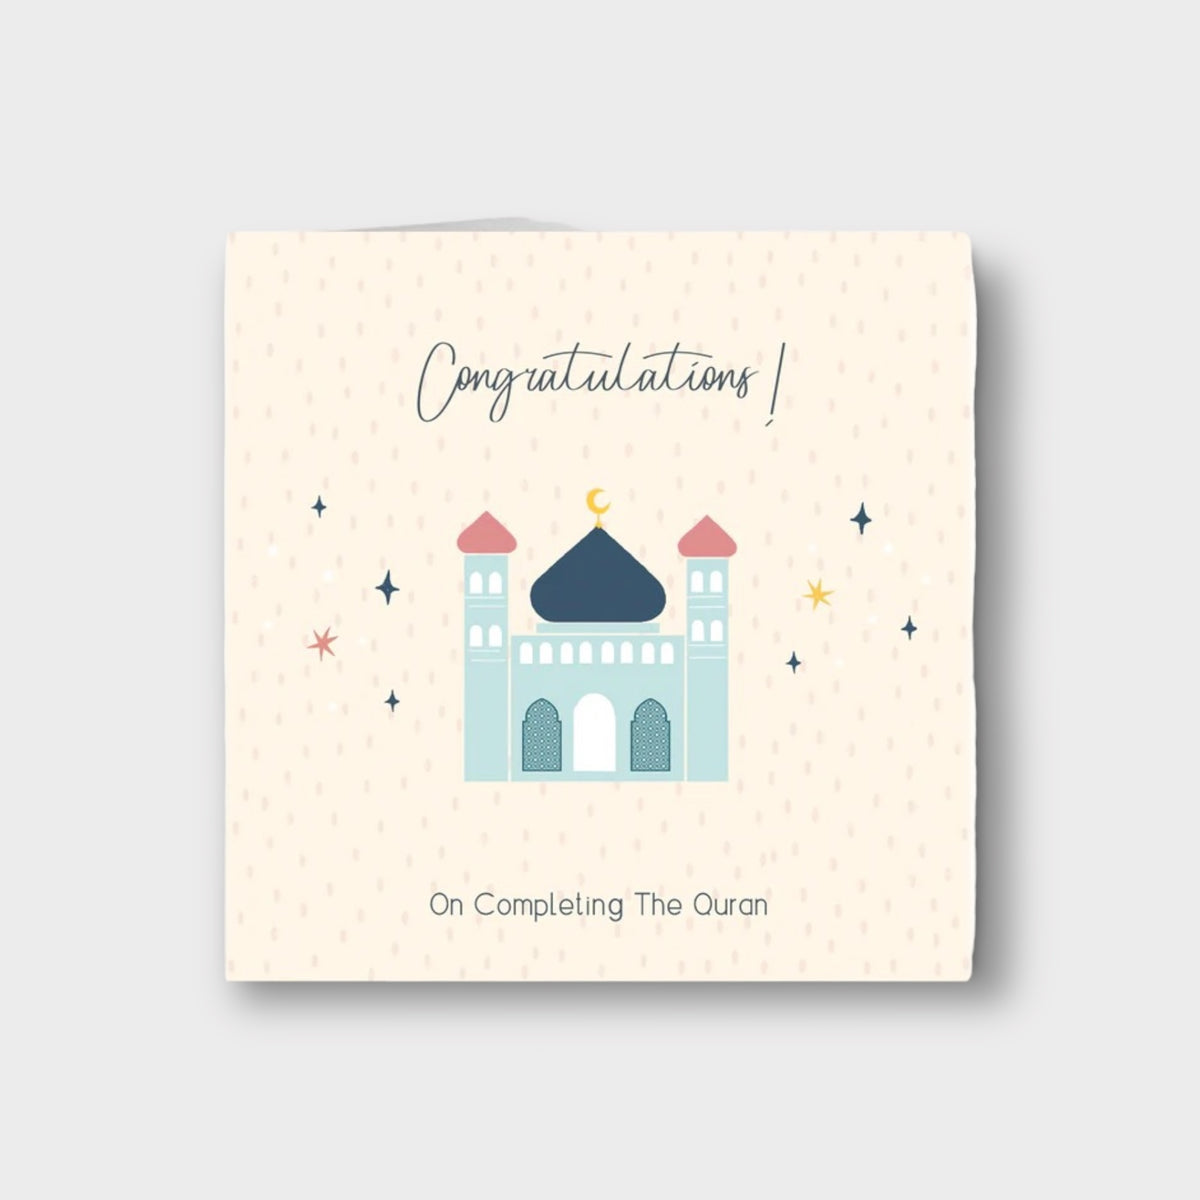 Congratulations on completing the Quran - Blue Mosque